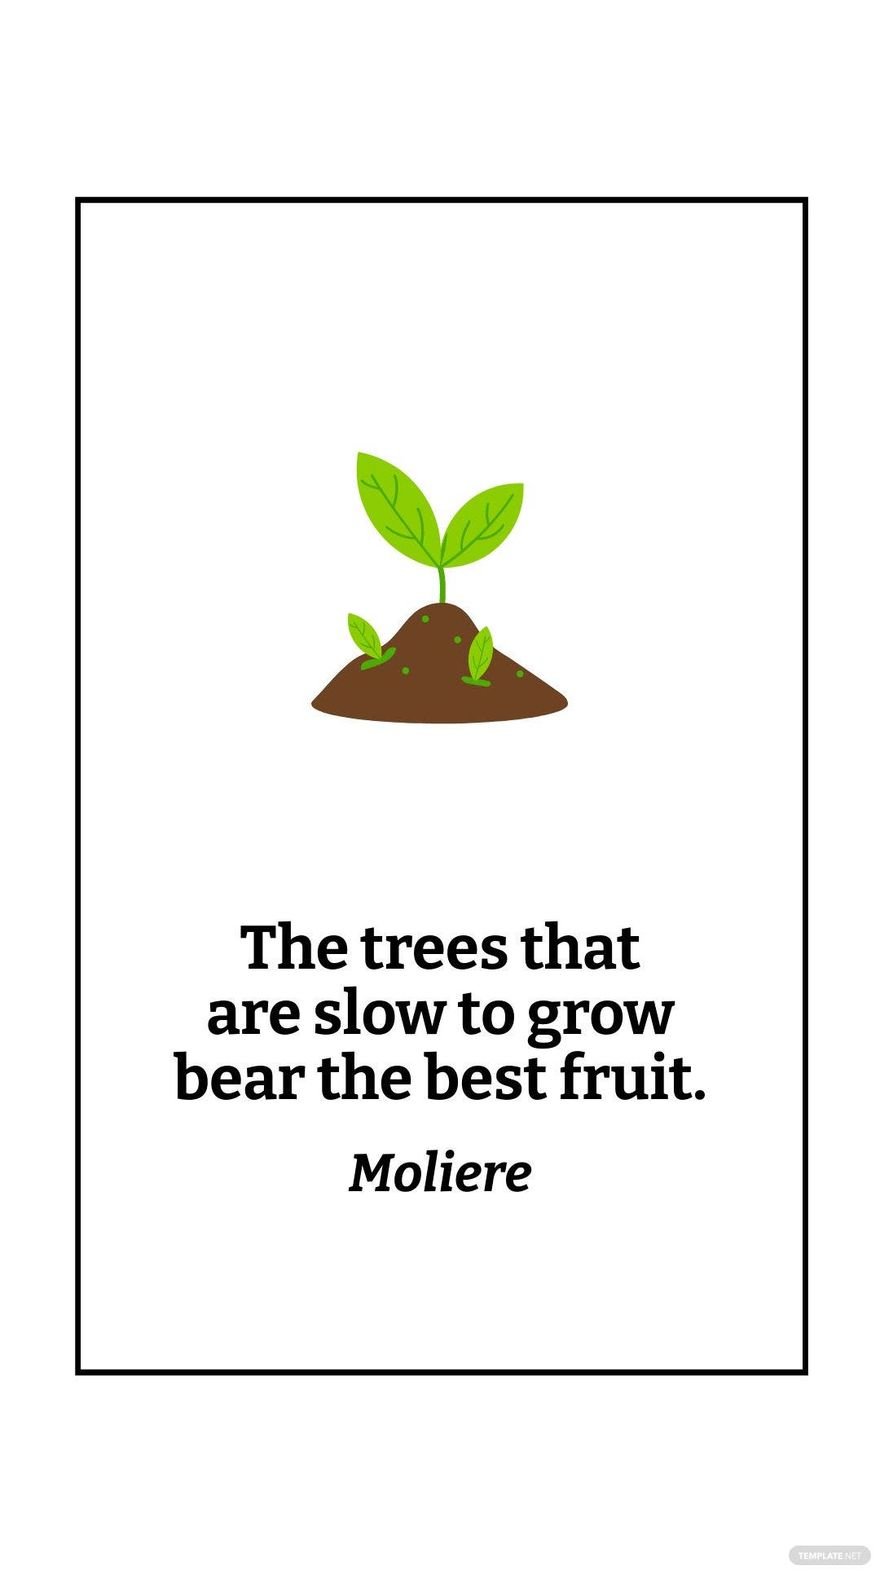 Moliere - The trees that are slow to grow bear the best fruit. in JPG